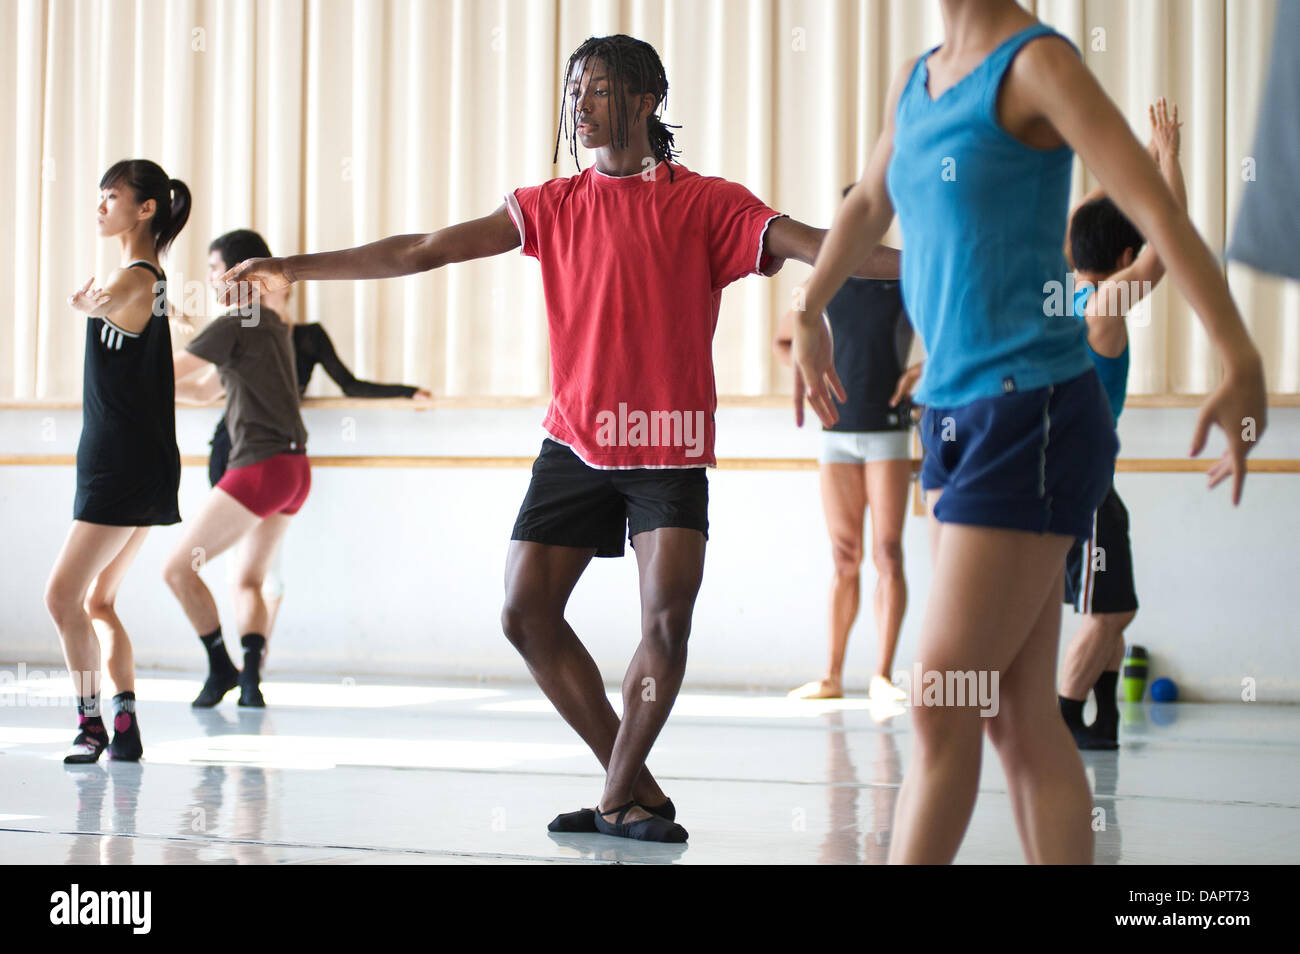 Ballet dancer Jamie Mejeh (M) practices with the Saarland State Theatre-based Donlon Dance Company in Saarbruecken, Germany, 23 August 2011. On 01 September 2011, the 18-year-old will begin his training at the School of Music and Dramatic Arts in Frankfurt even though he has only been a ballet dancer for the past 17 months. Prior to that Mejeh had been a hip hop dancer. Photo: Oliv Stock Photo